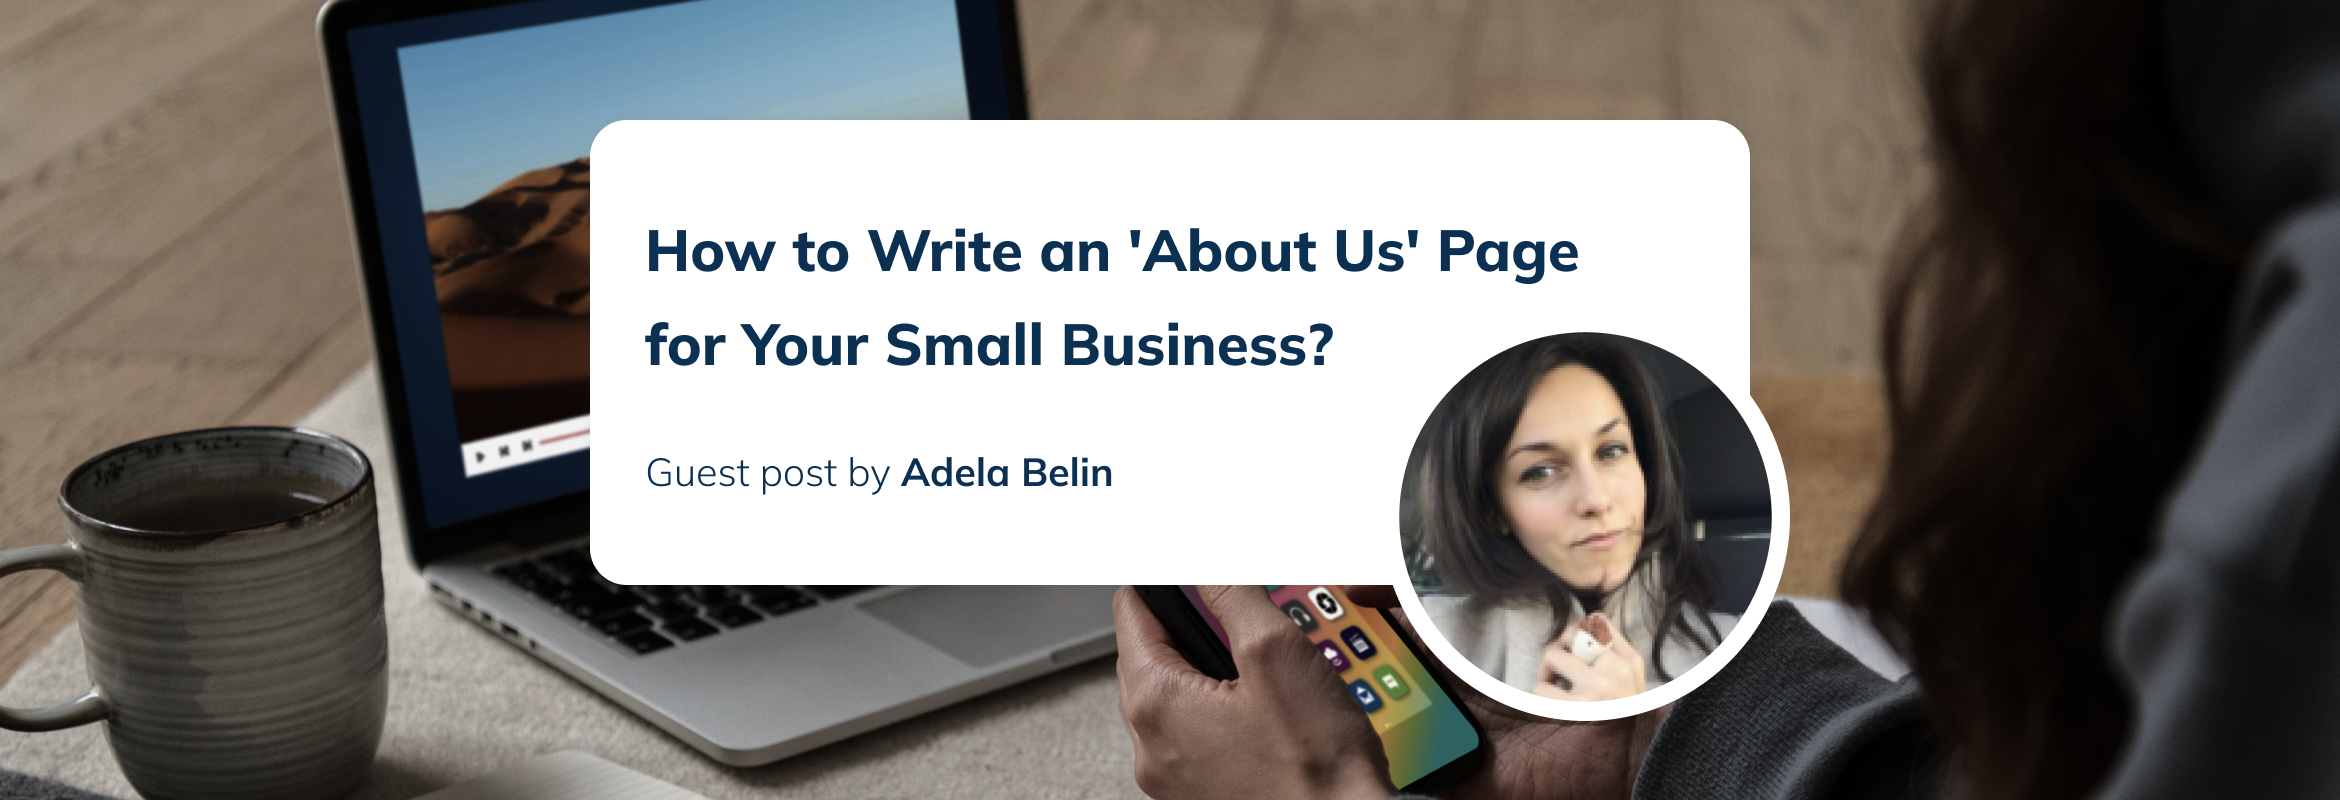 Write an 'About Us' Page for your small business website